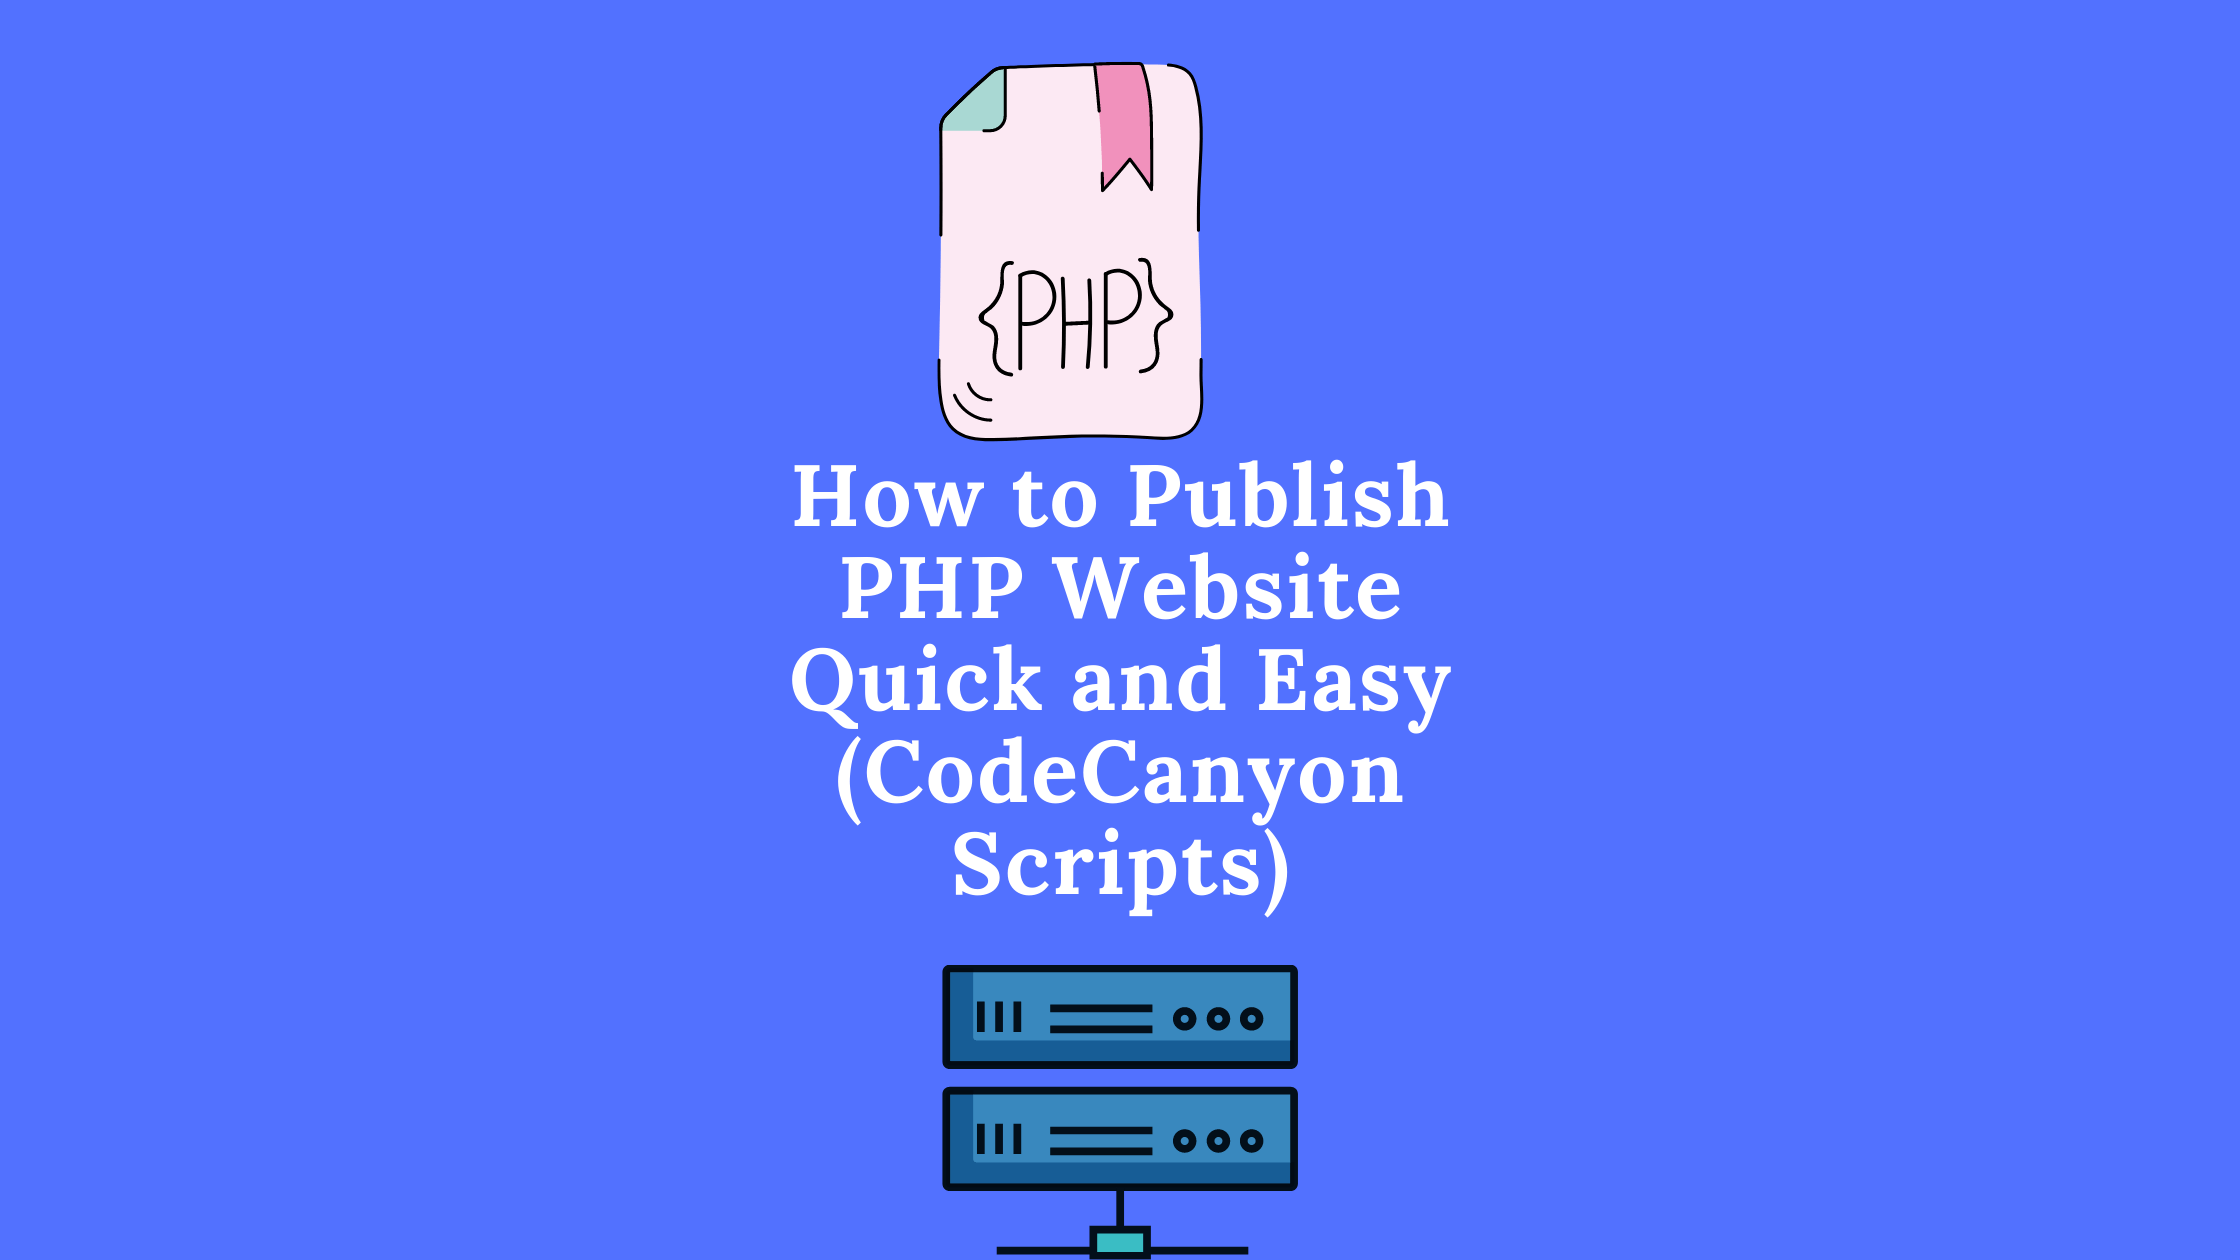 How to Publish PHP Website Quick and Easy (CodeCanyon Scripts)